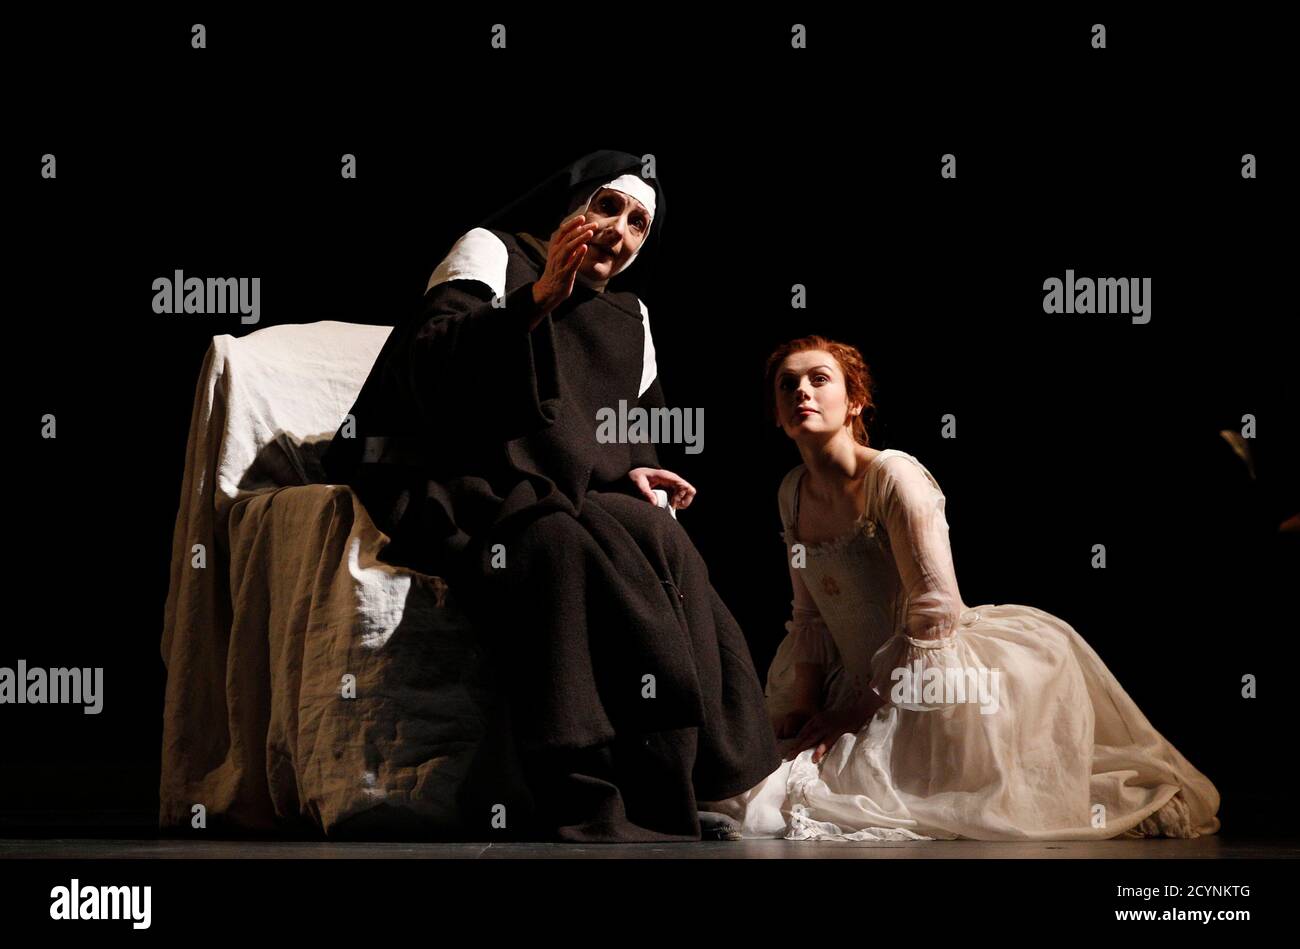 Singers Deborah Polaski (L) and Patricia Petibon perform on stage during a dress rehearsal of Francis Poulenc's opera "Dialogues des Carmelites" at Theater an der Wien in Vienna April 13, 2011. The opera is conducted by Bertrand de Billy and will premiere on April 16.   REUTERS/Herwig Prammer (AUSTRIA - Tags: ENTERTAINMENT SOCIETY) Banque D'Images